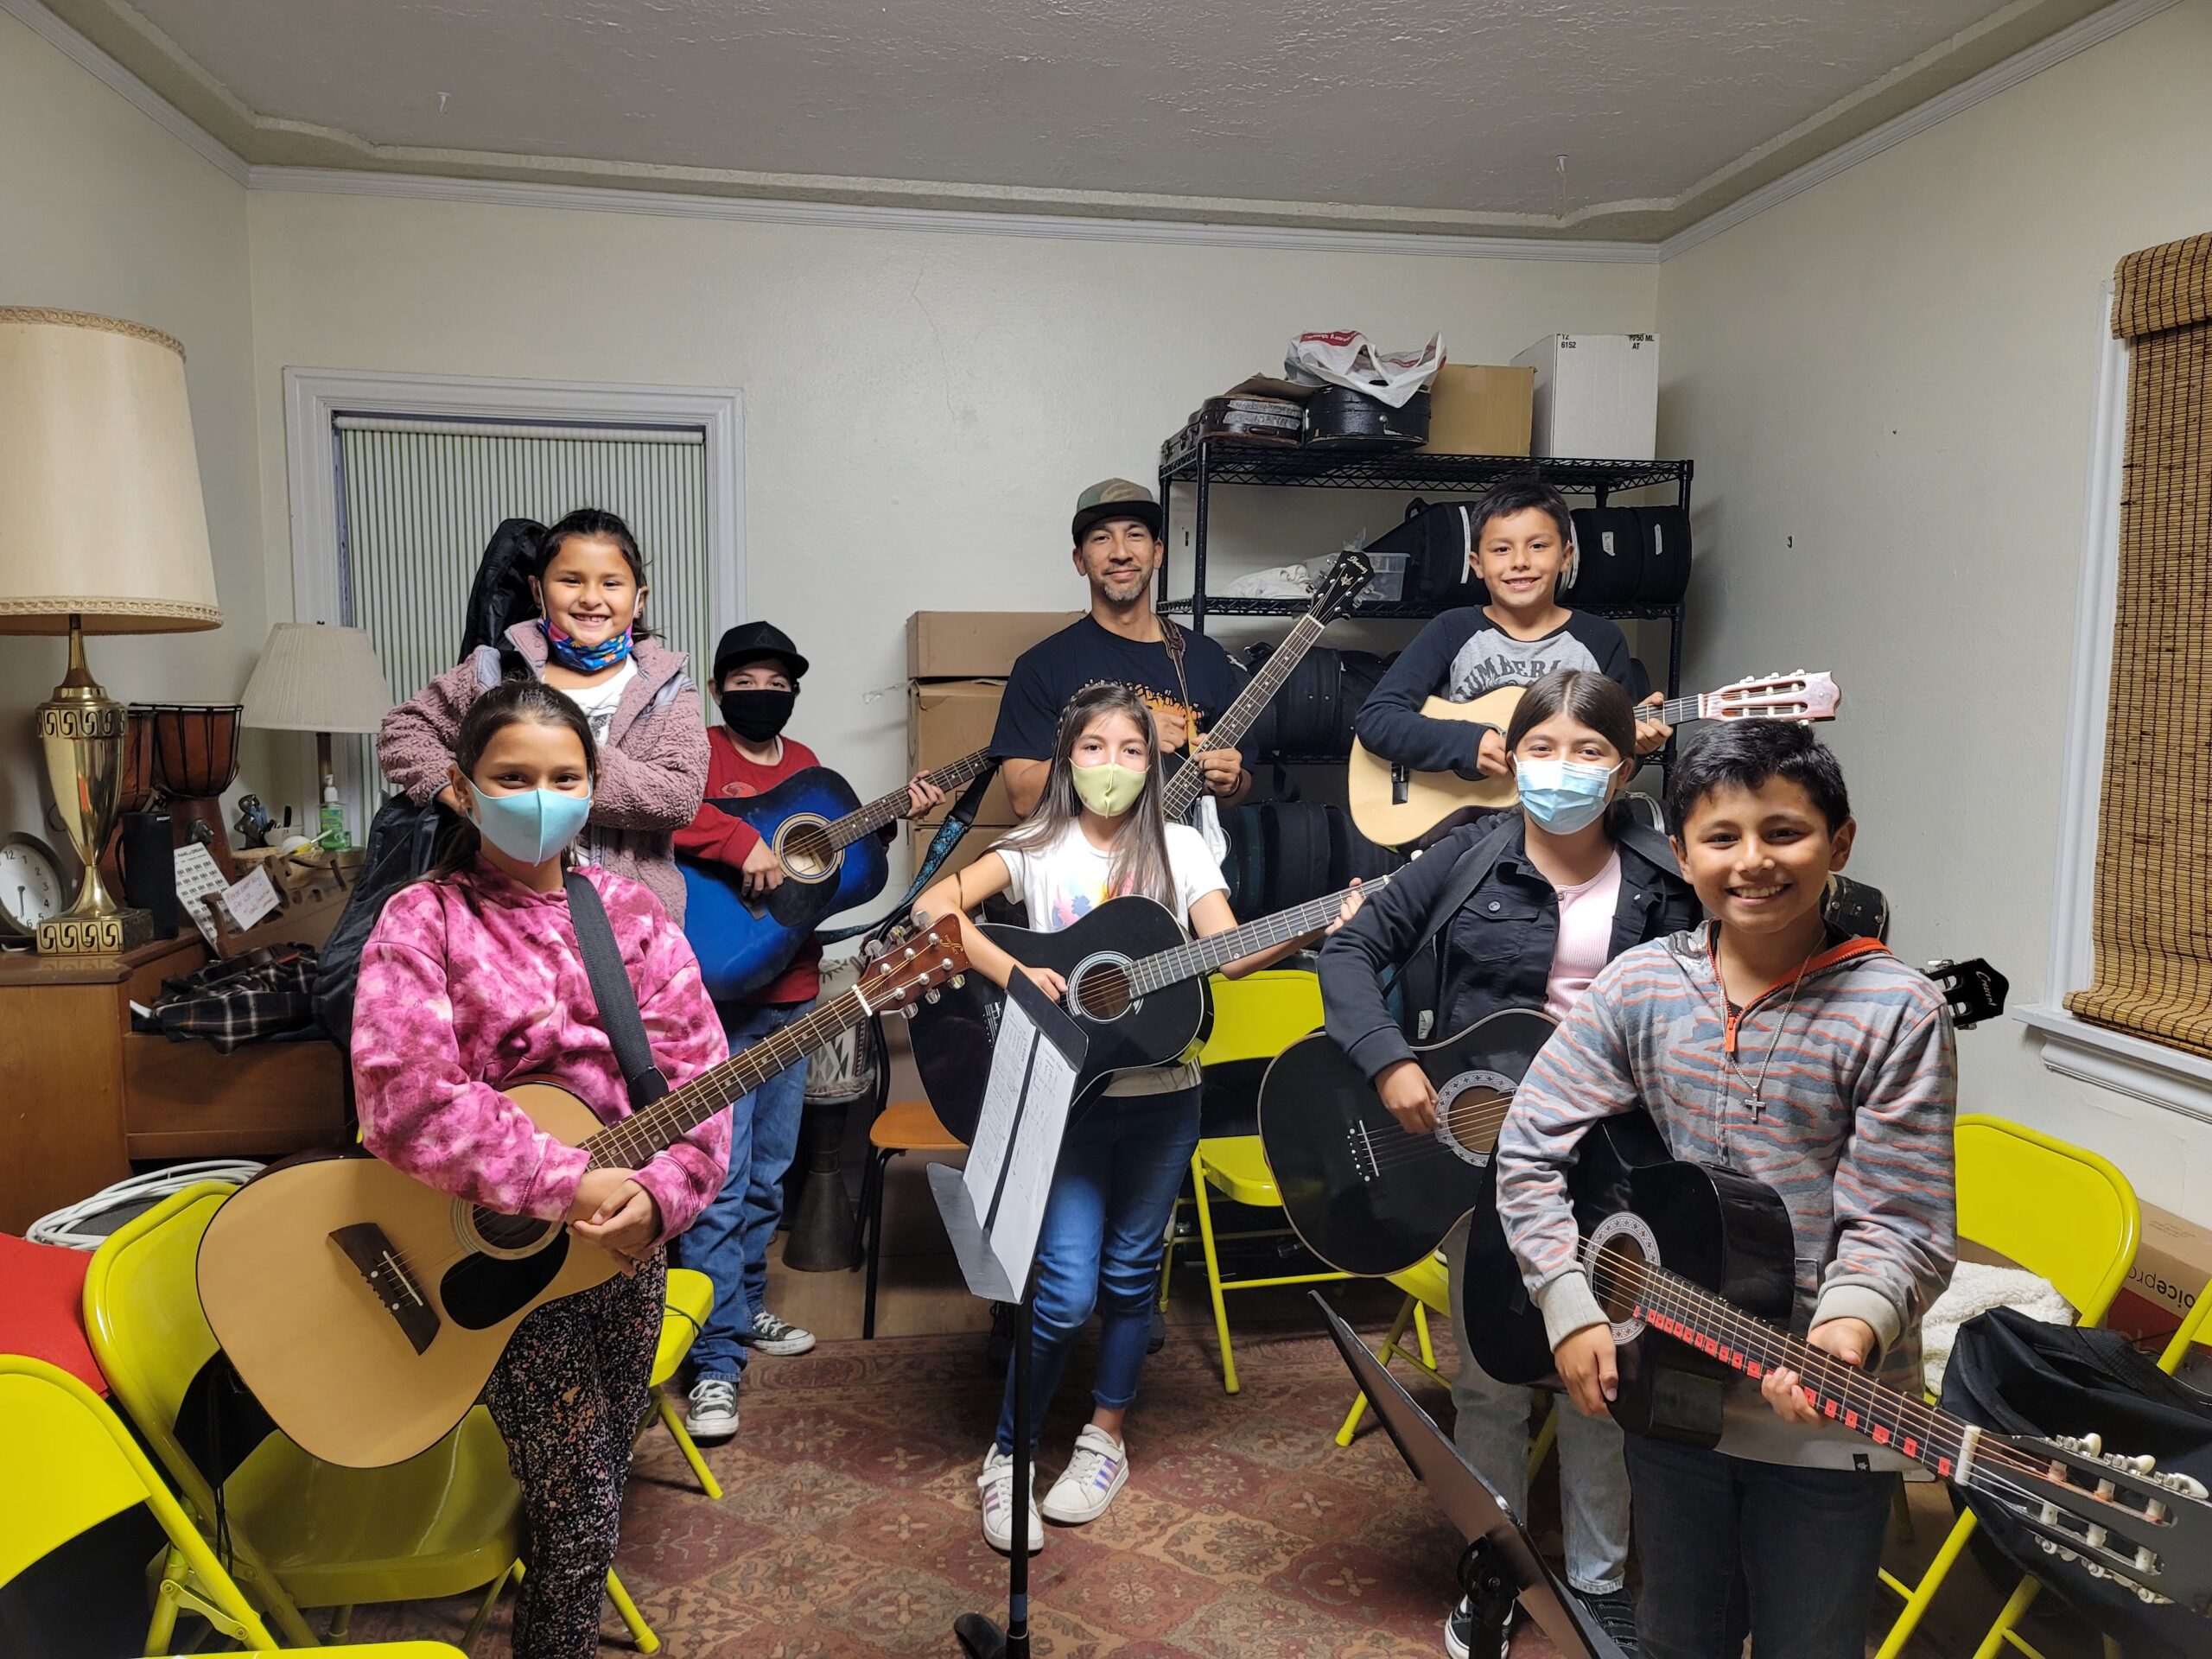 Children and their instructor holding guitars for their guitar class at Sol Treasures.